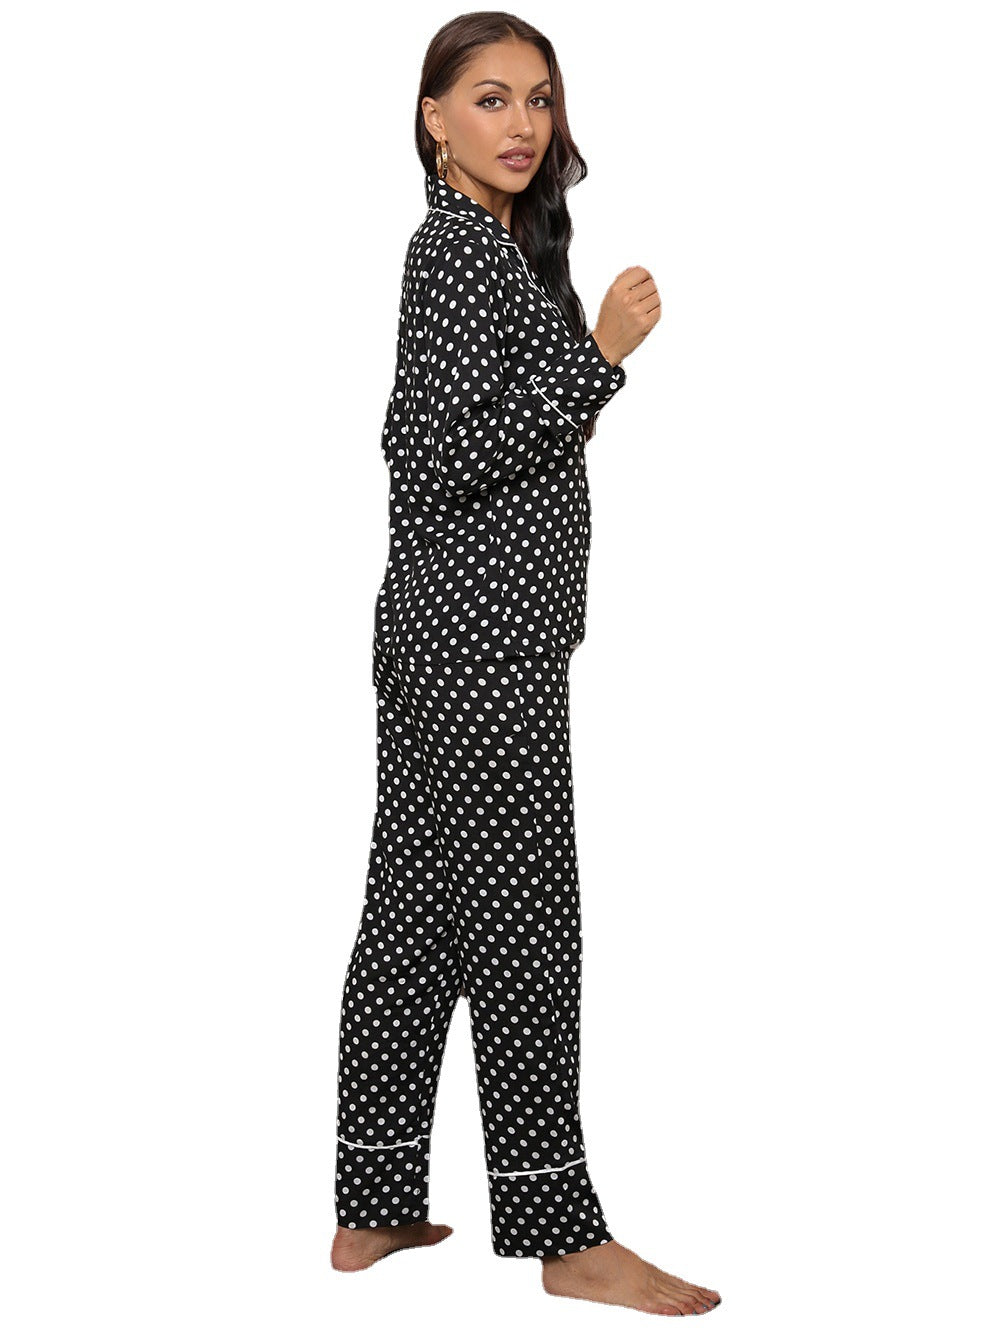 Home Wear Polka Dot Collared Cardigan Top Trousers Home Pajamas Suit